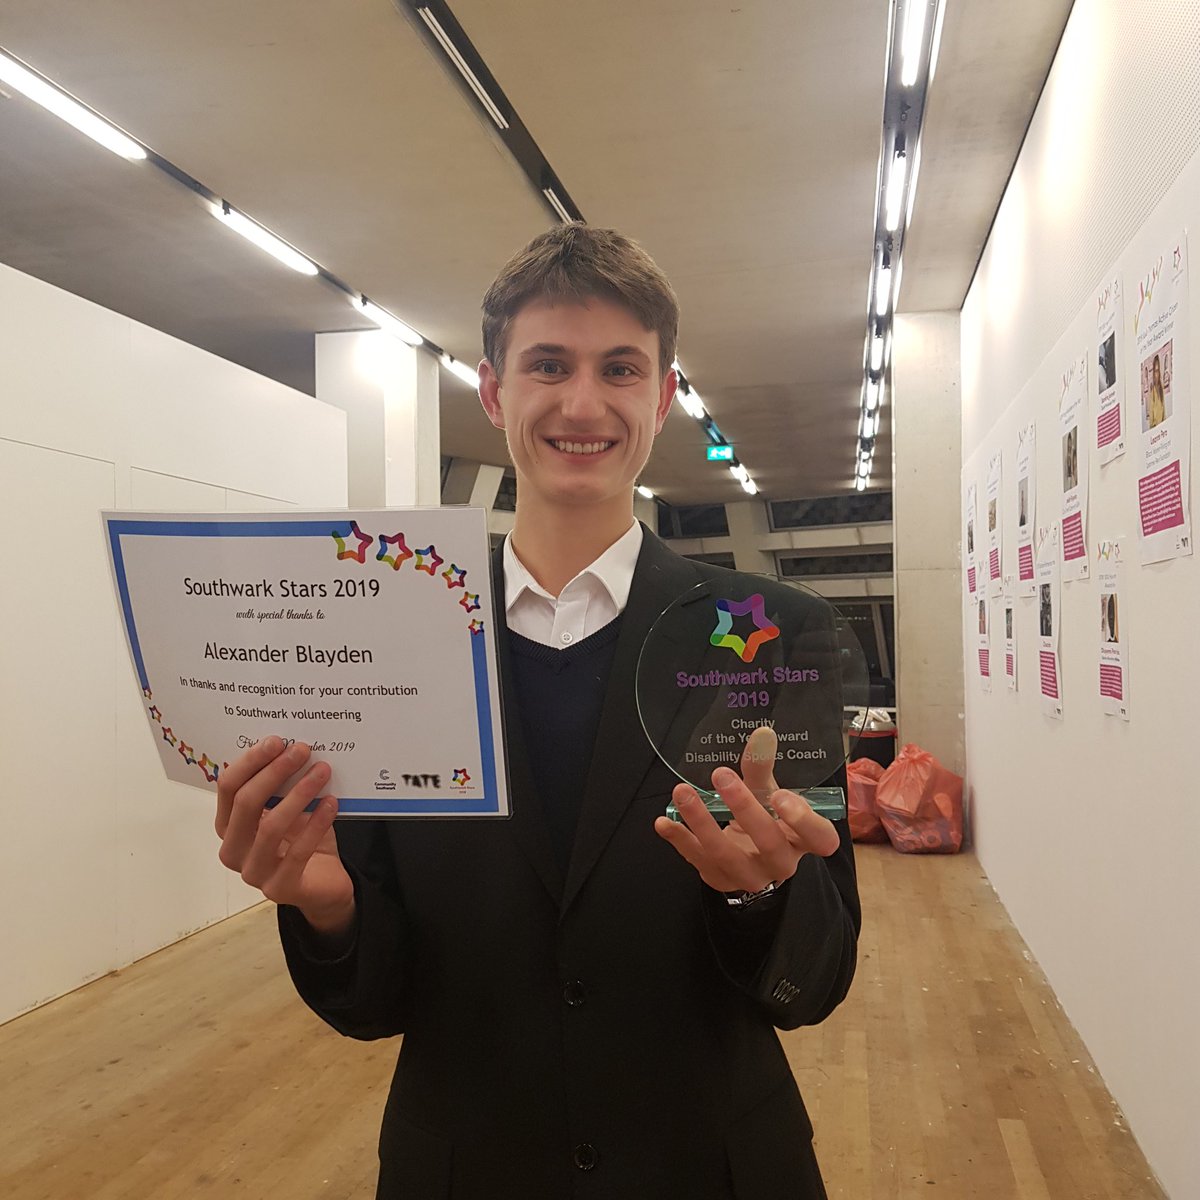 2019 #SouthwarkStars was a great success for us tonight!!
✔Club Southwark's Alexander Blayden was recognized for over 100 hours of volunteering! 
✔Disability Sports Coach also took home the 2019 Charity of the Year Award